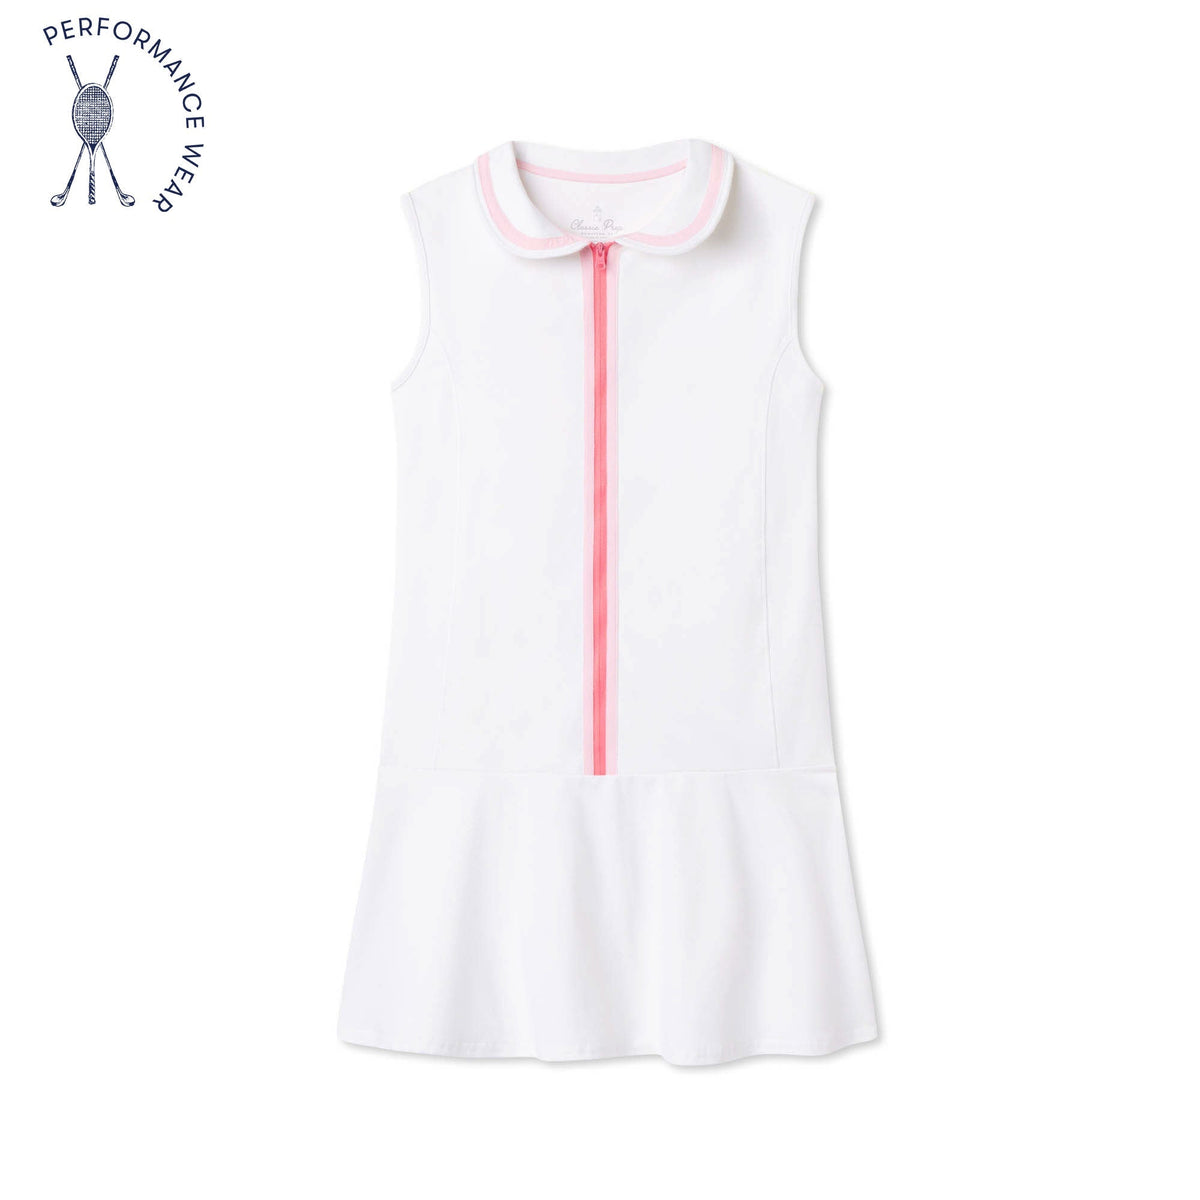 Classic and Preppy Vivian Tennis Performance Sherbet Dress, Bright White-Dresses, Jumpsuits and Rompers-Bright White-2T-CPC - Classic Prep Childrenswear